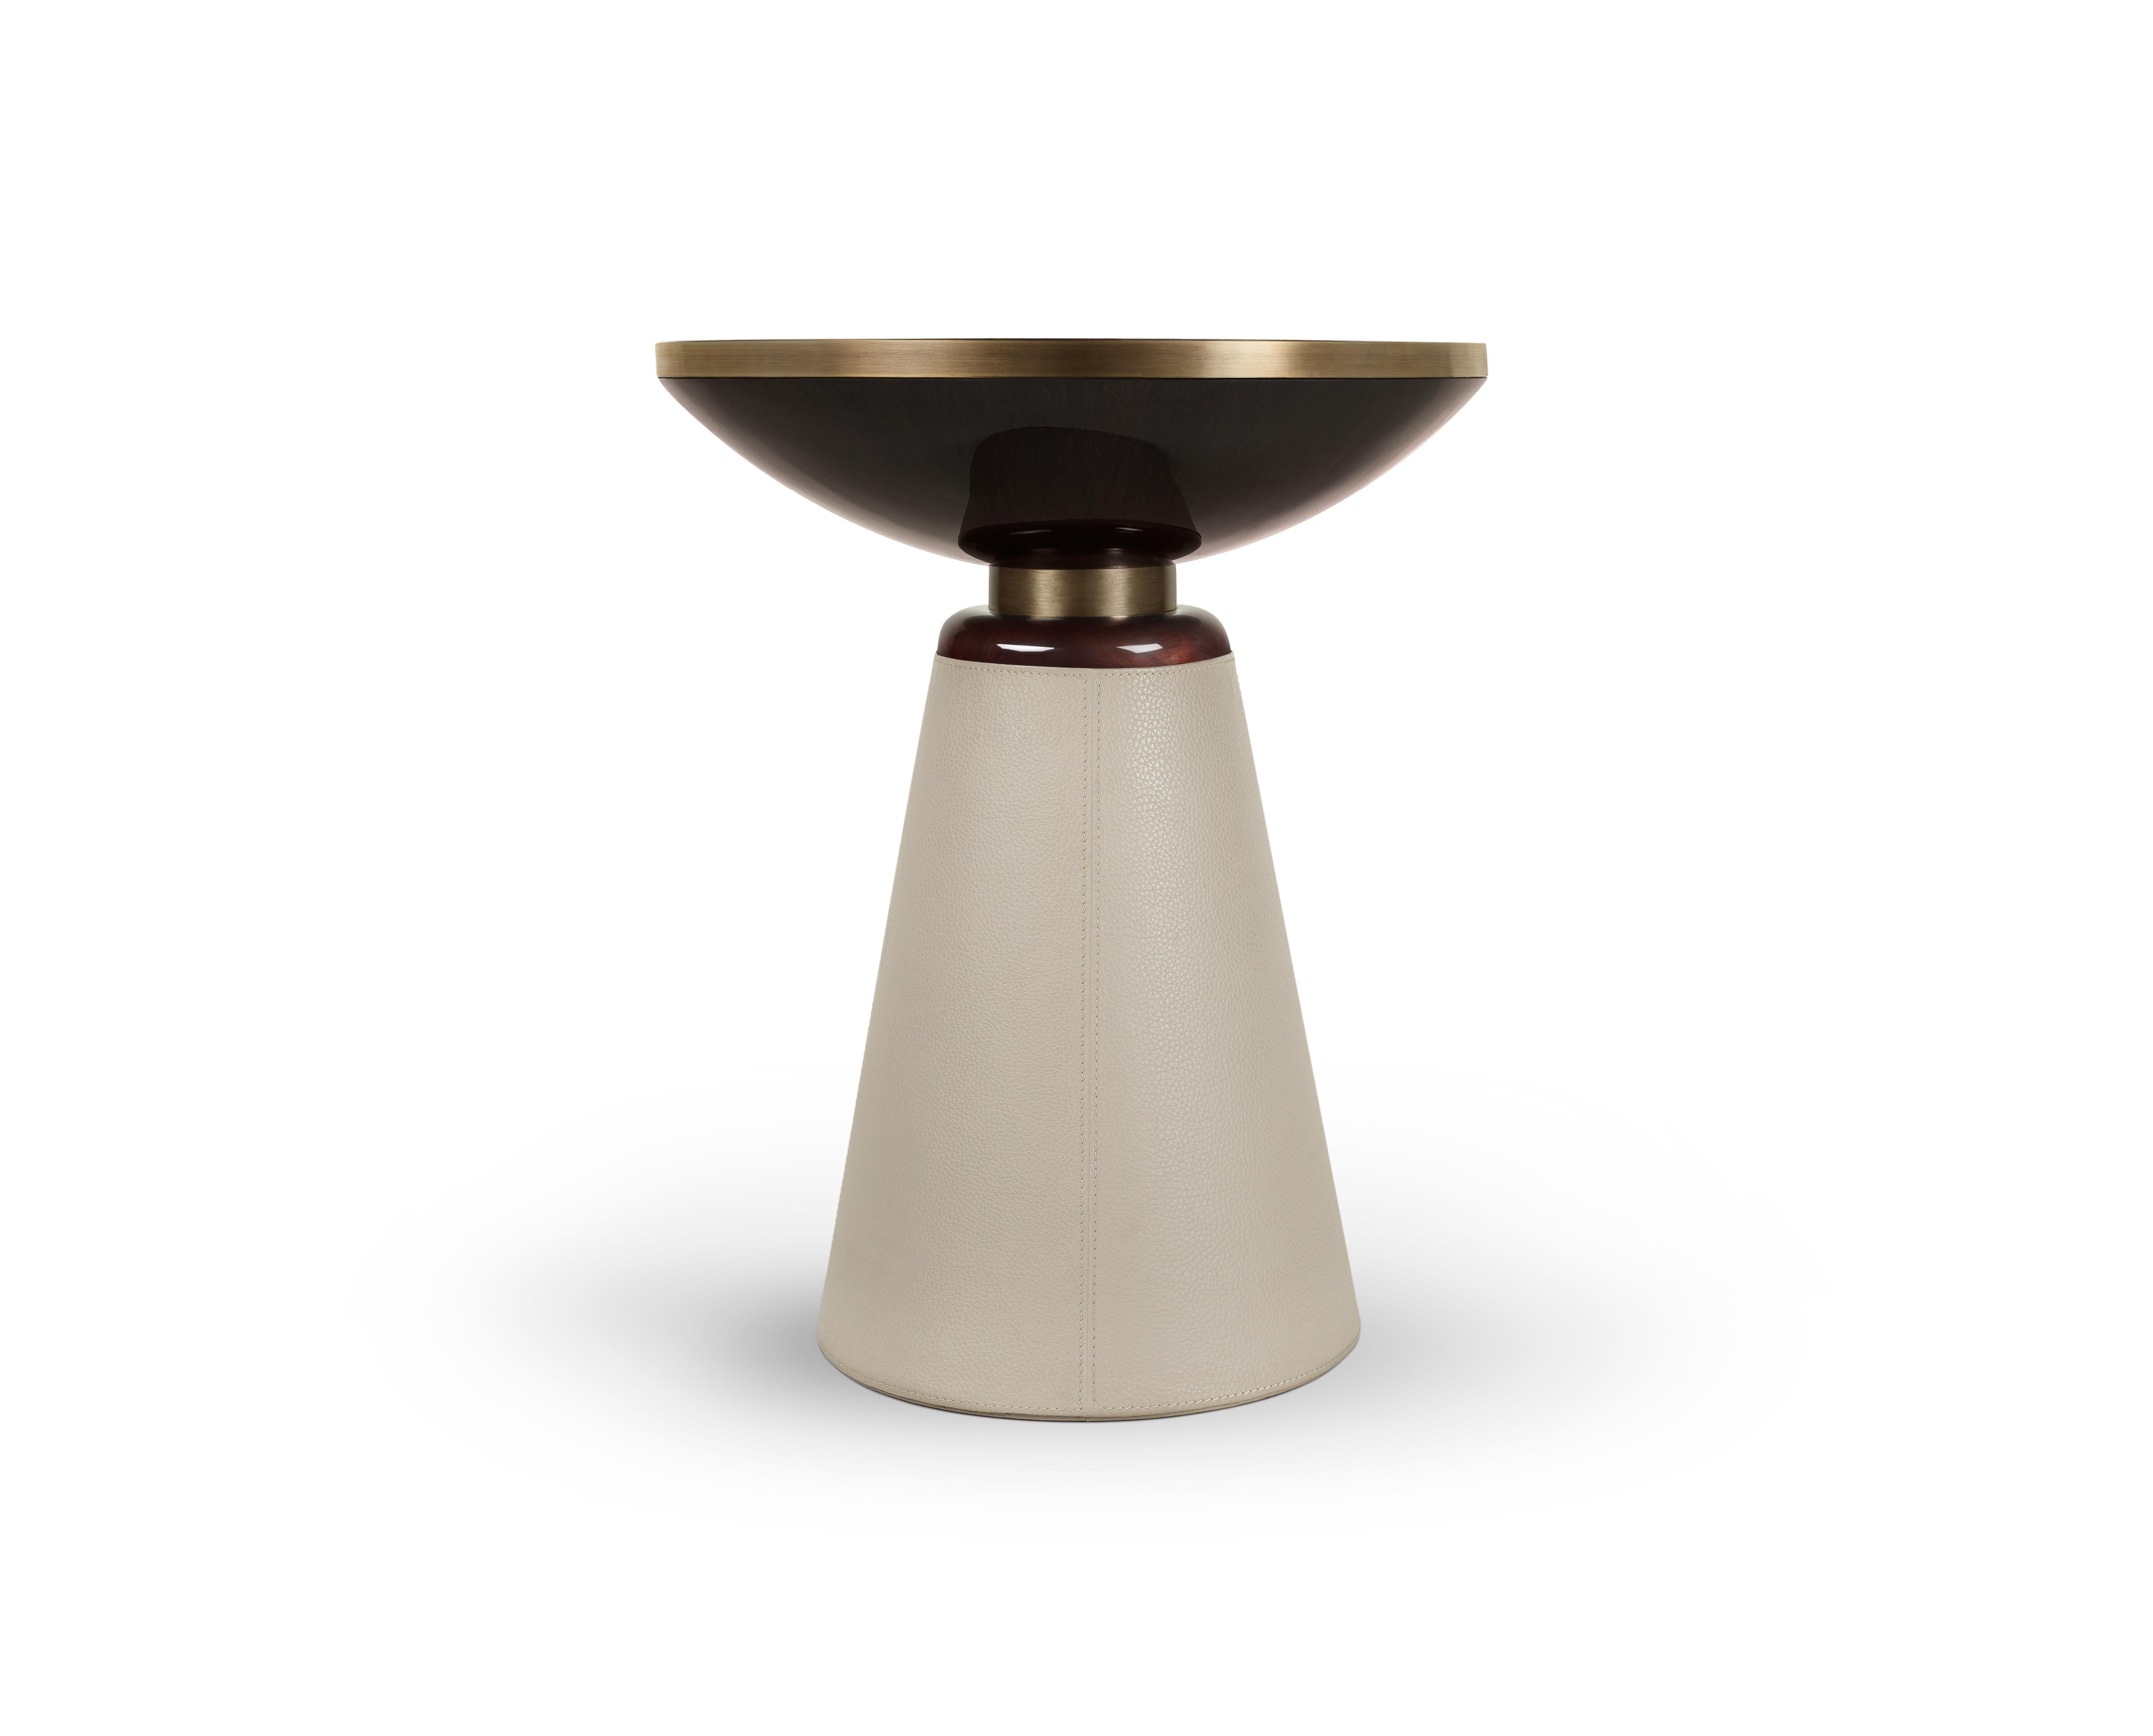 Temper side table by Madheke
Dimensions: D 43.5 x W 43.5 x H 55 cm.
Materials: Leather, wood, metal.
Veneered top, bronzed collar, fluted crafted leather base.

Reflecting the finest in craftsmanship, innovation and heritage, Madheke creates